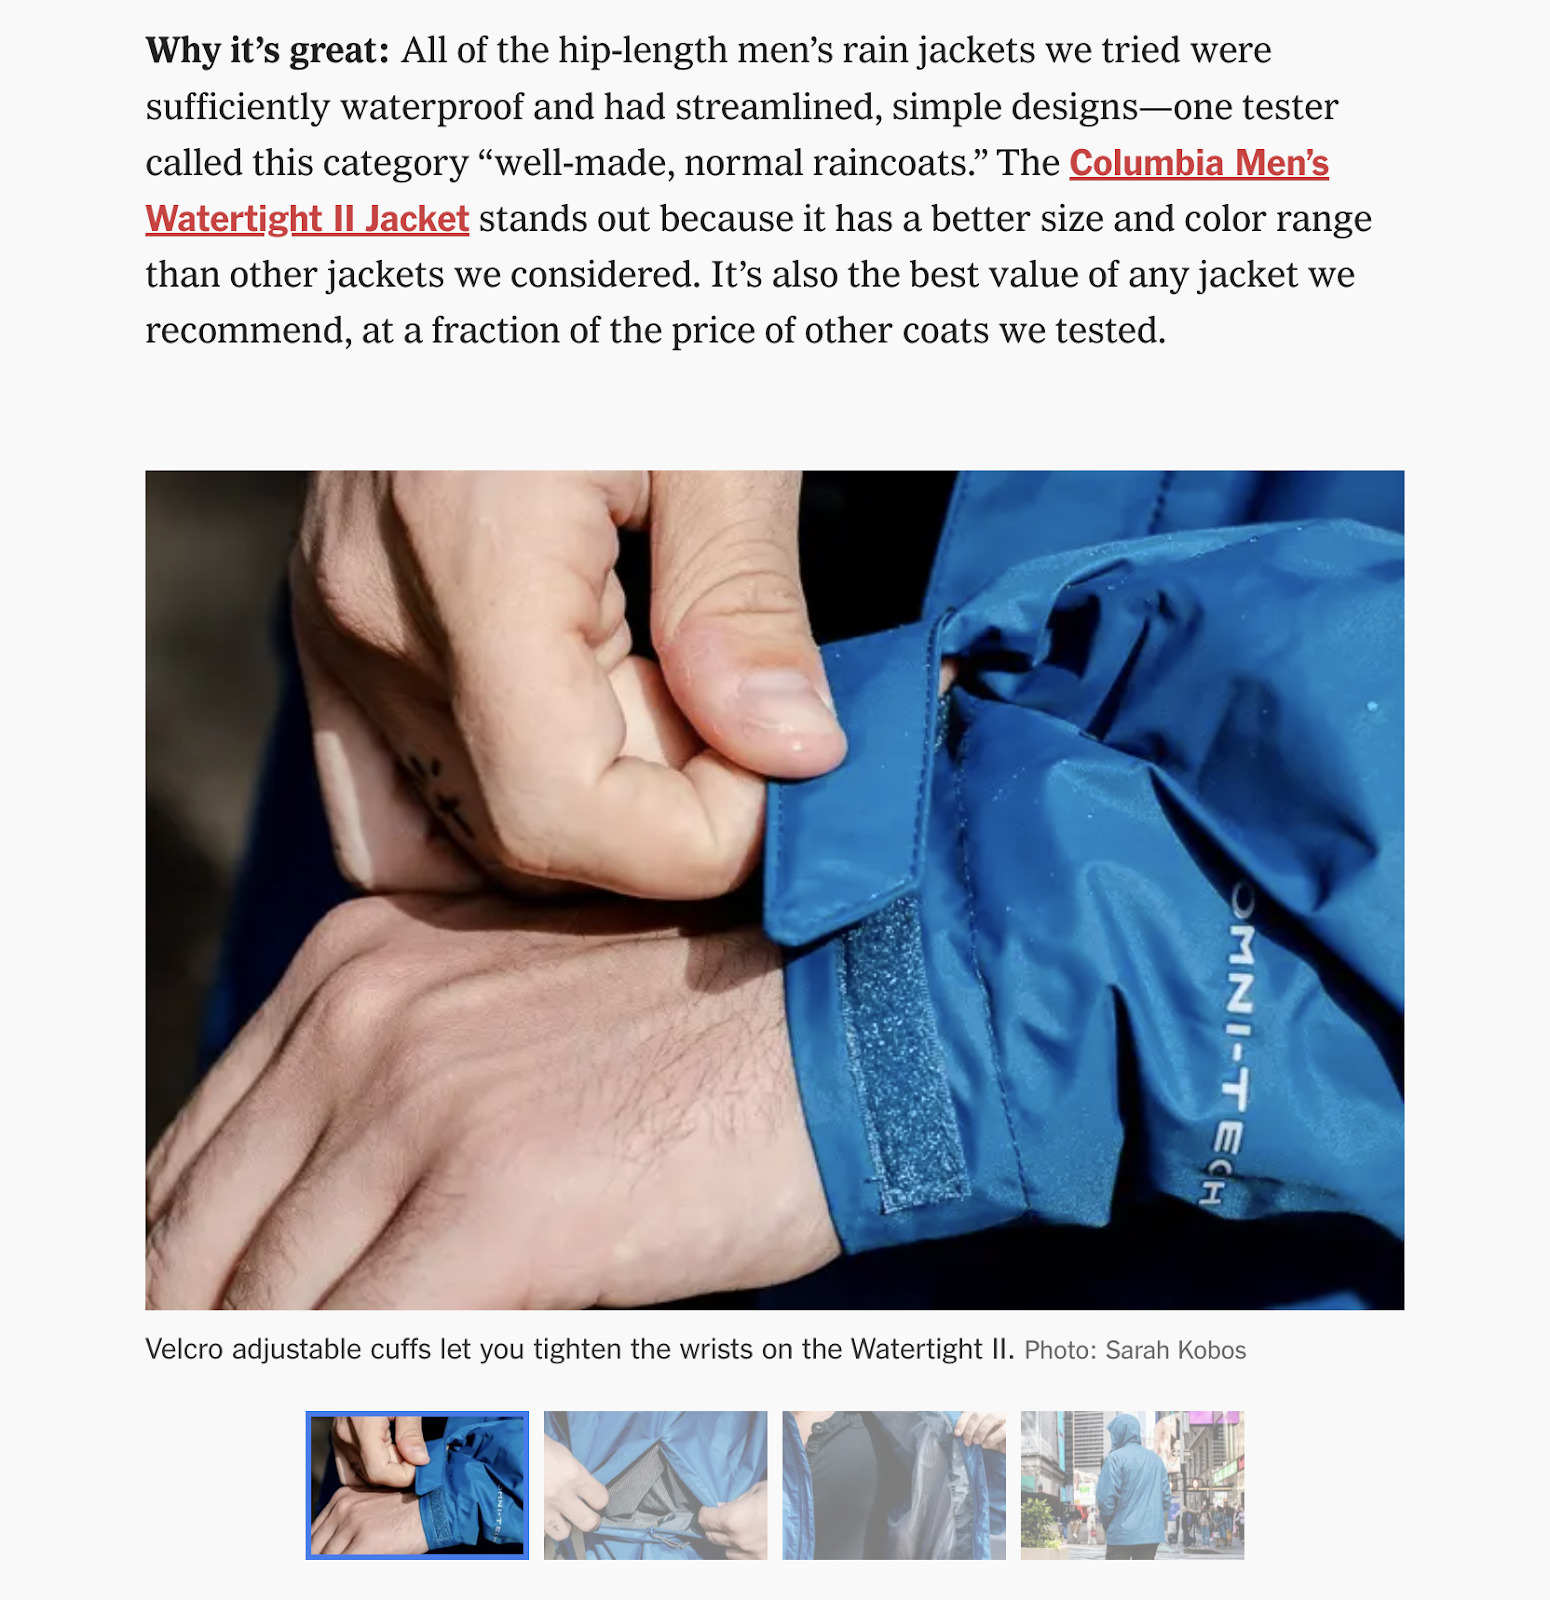 Short, positive write-up about a blue rain jacket; below that, picture of someone's hands adjusting the jacket's velcro cuffs